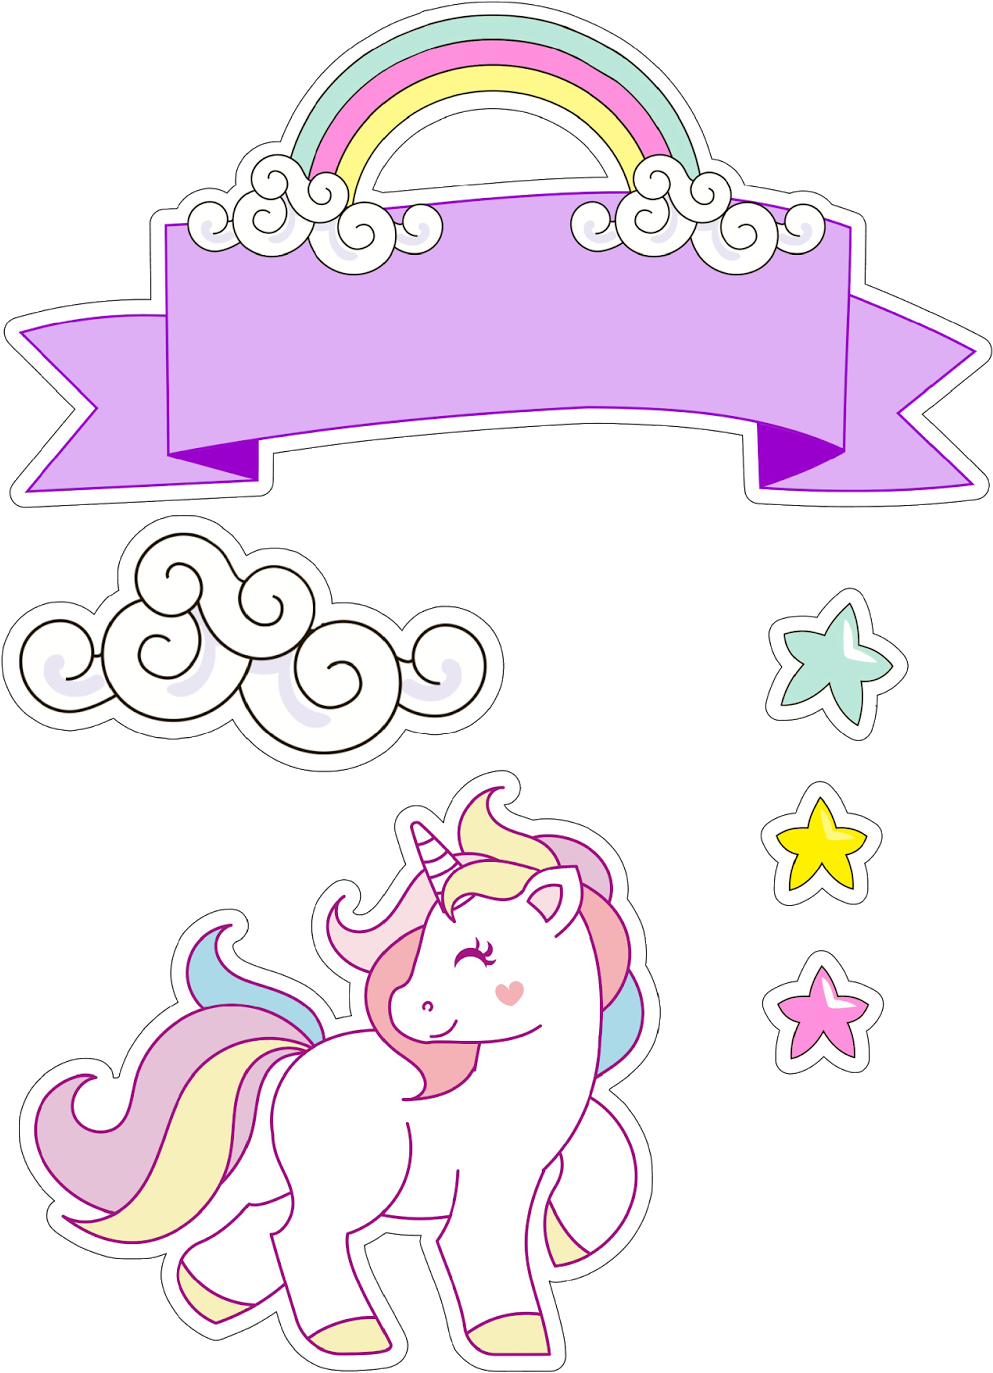 Magical Unicornand Rainbow Banner PNG image